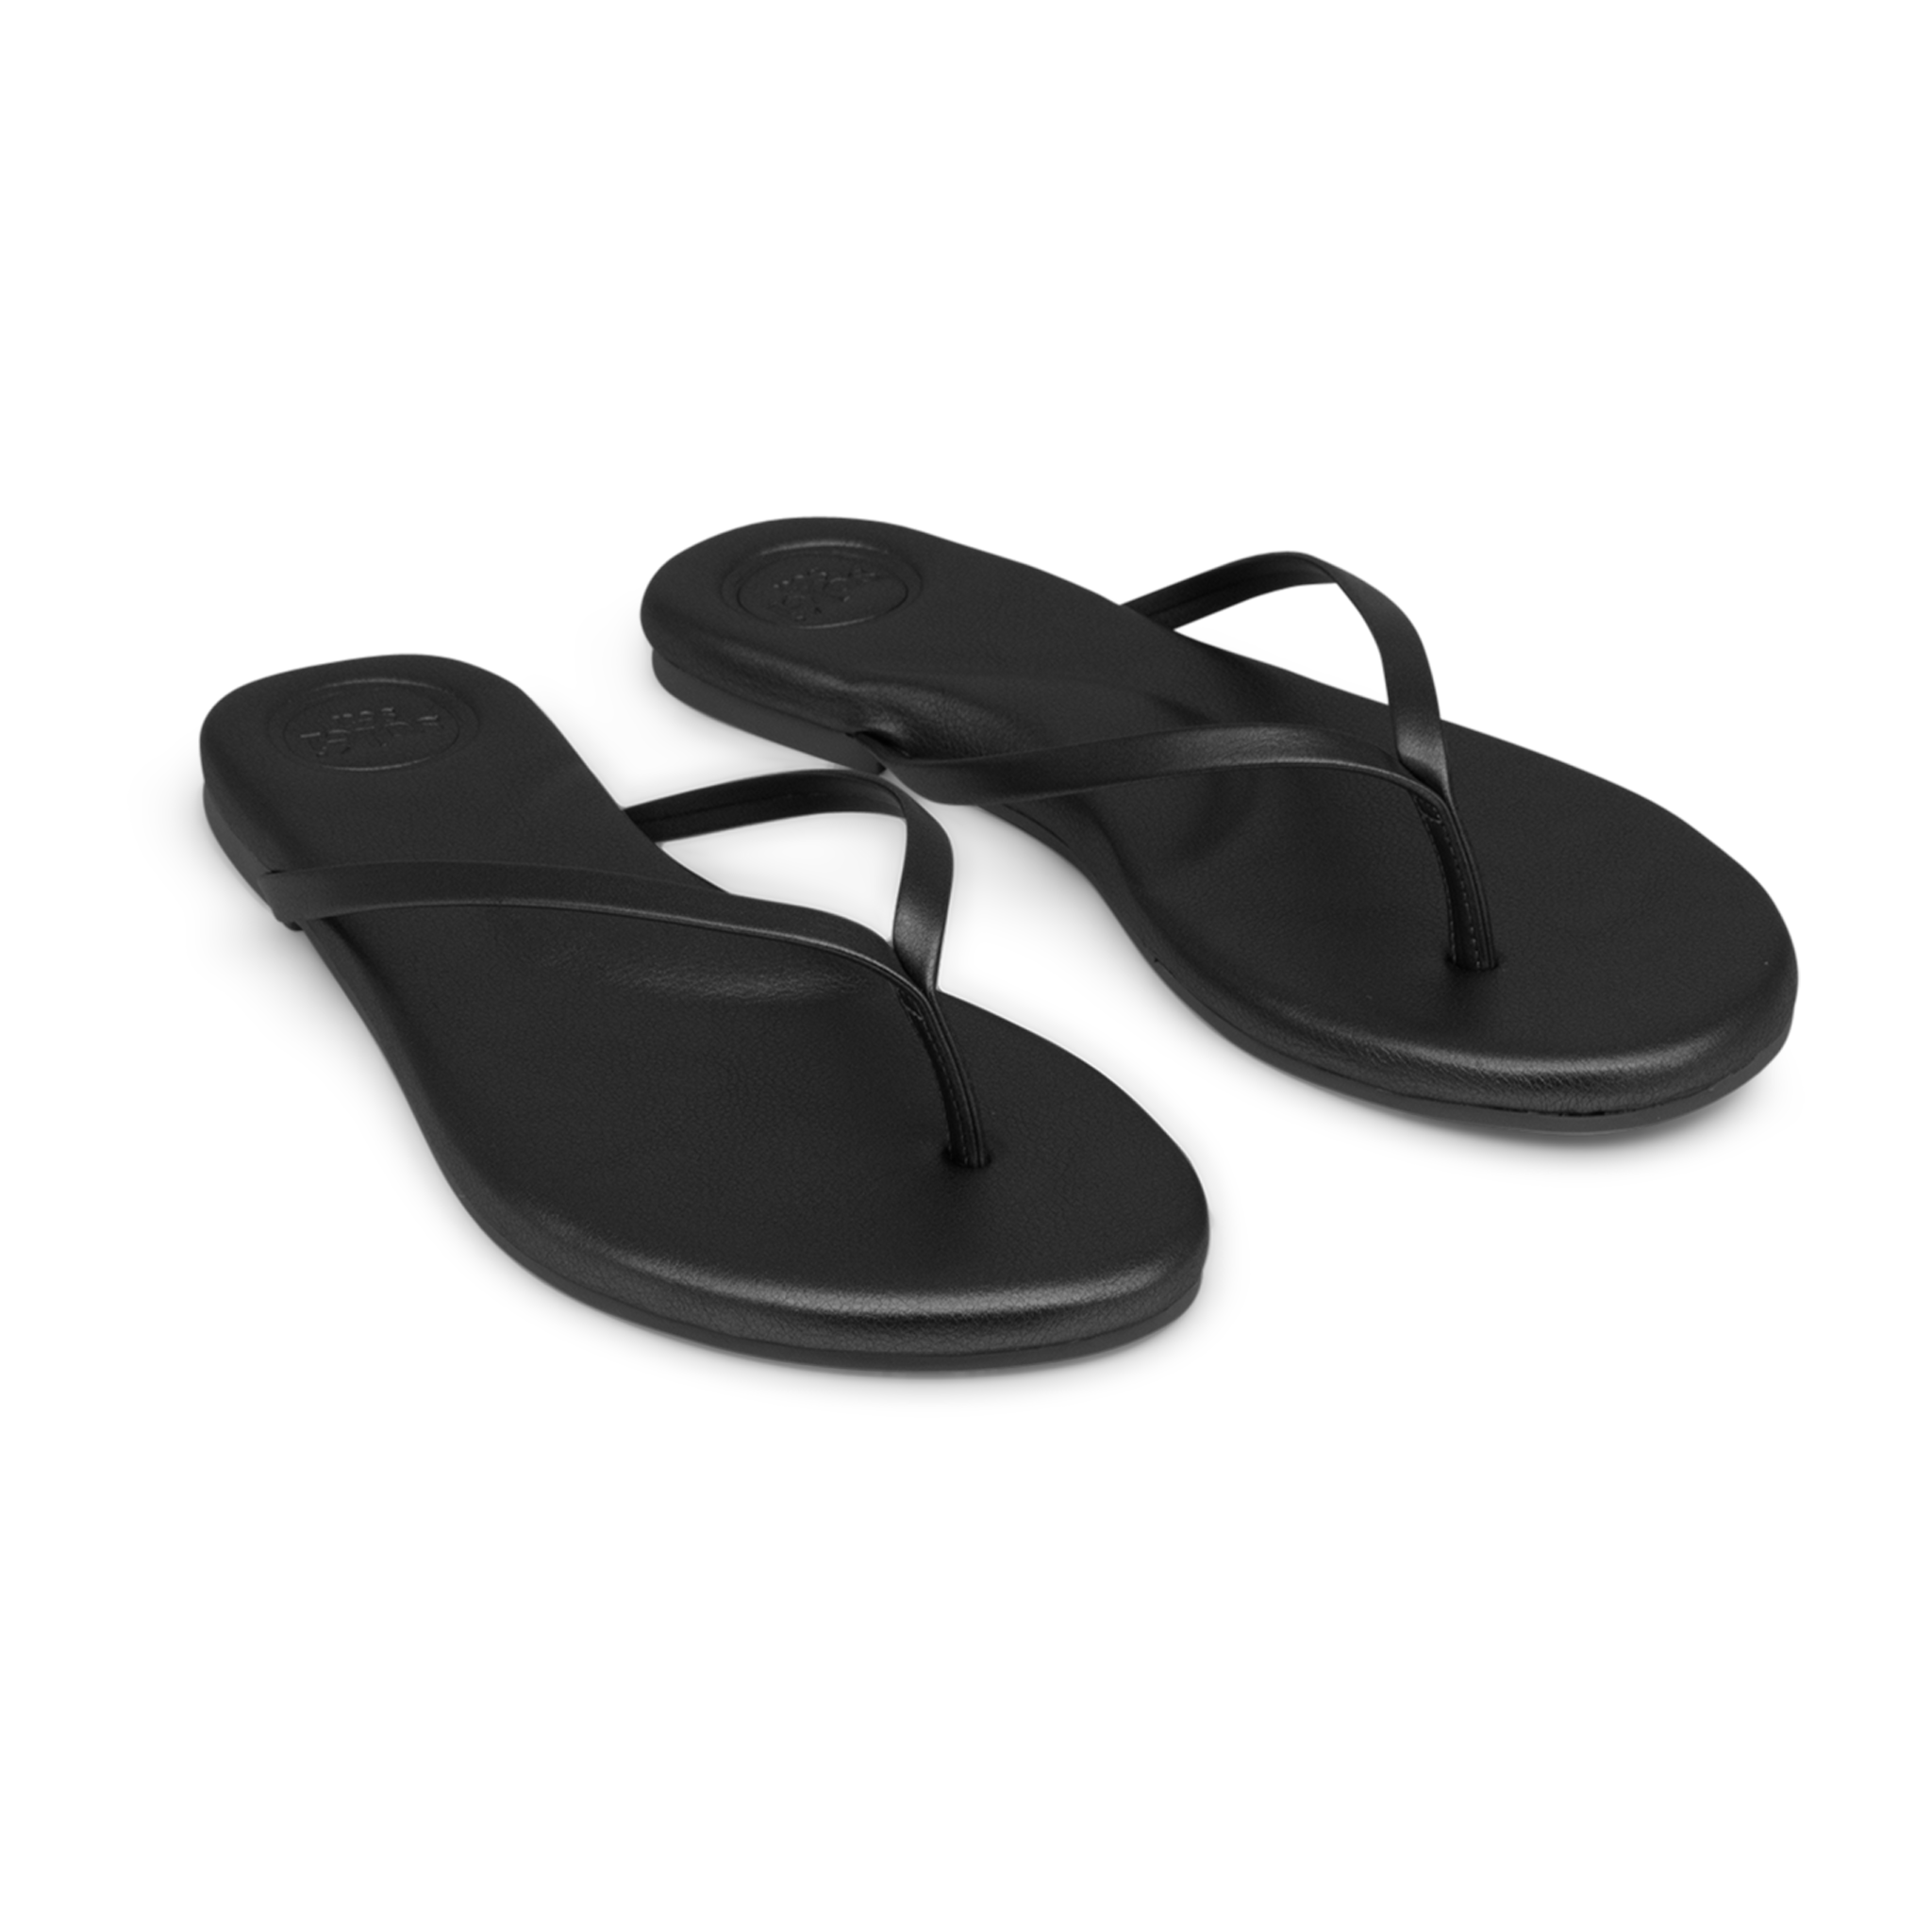 Solid Black Flip Flop w Arch Support and Padded footbed